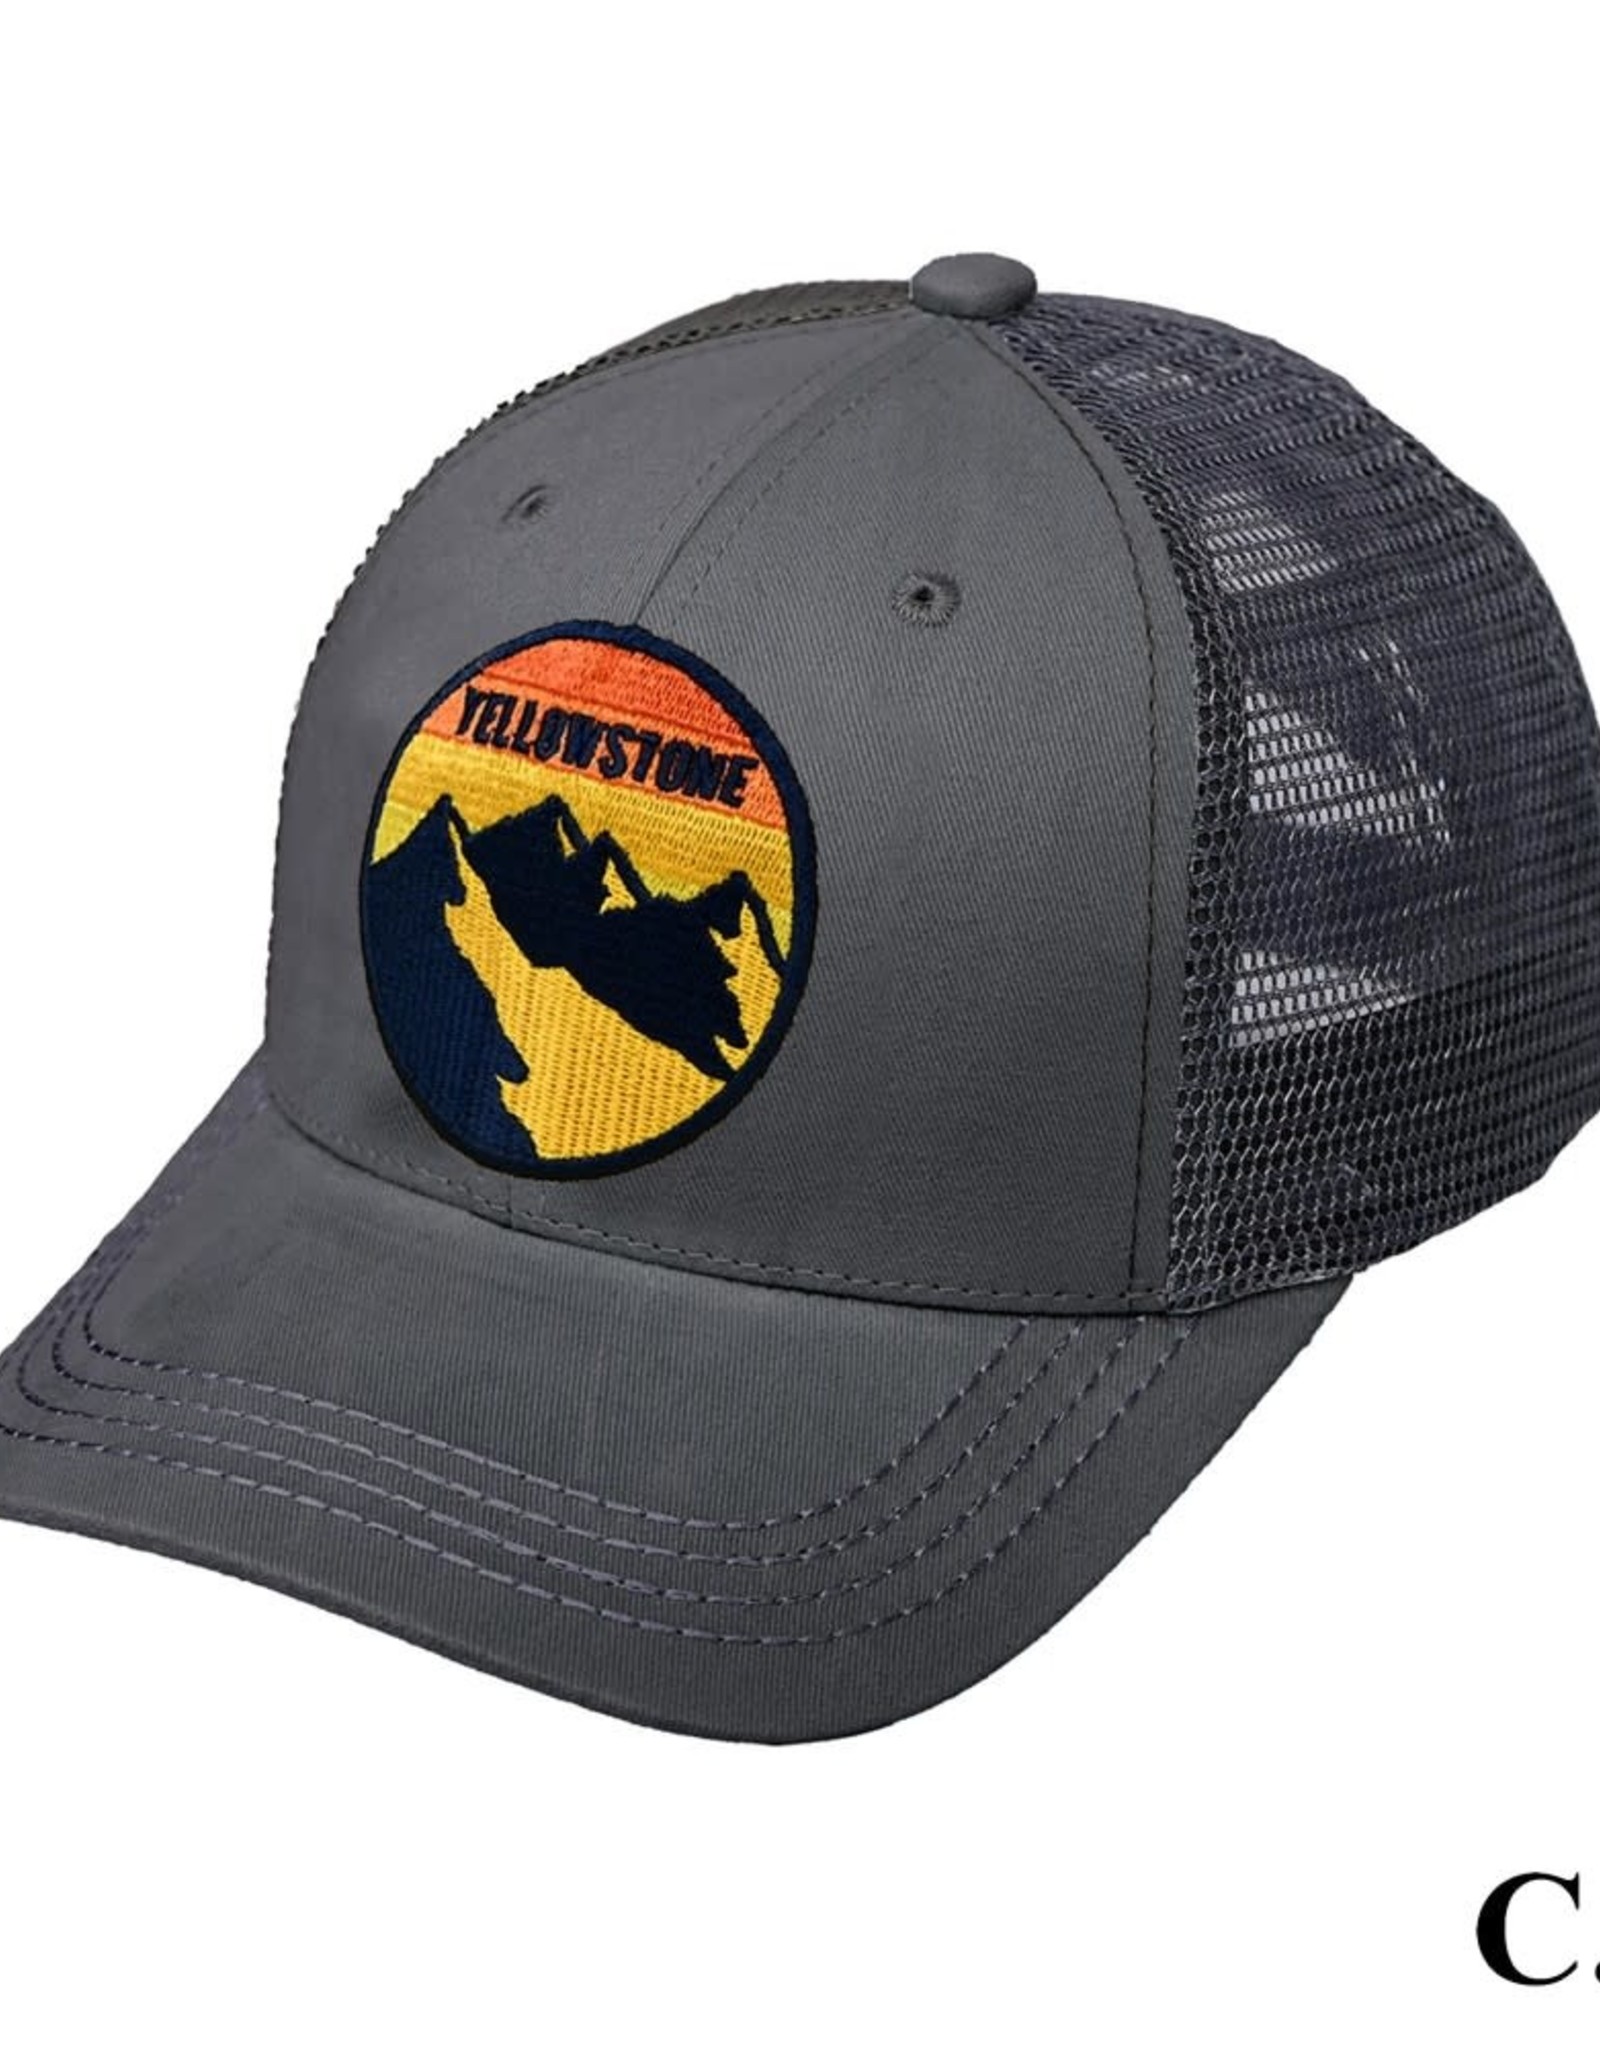 judson 729046 - C.C Yellowstone Embroidery Patch Men's Baseball Cap With Mesh Back  - Charcoal